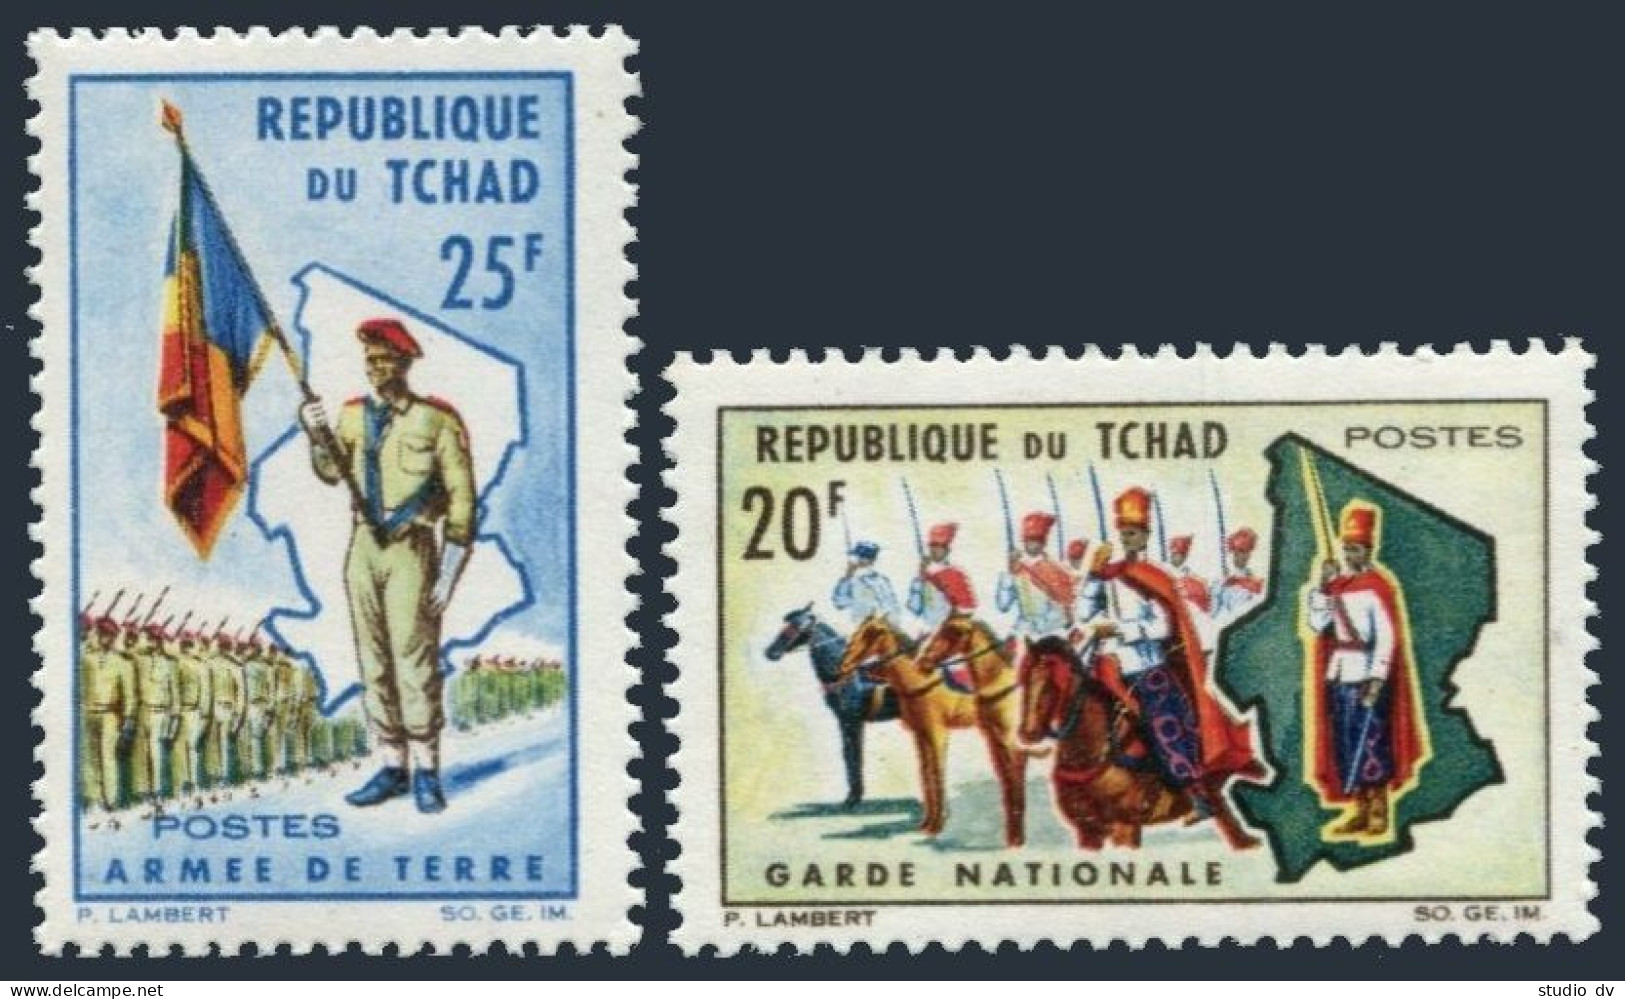 Chad 104-105, MNH. Michel 127-128. Army Of Chad, 1964. Guard, Infantry. - Tschad (1960-...)